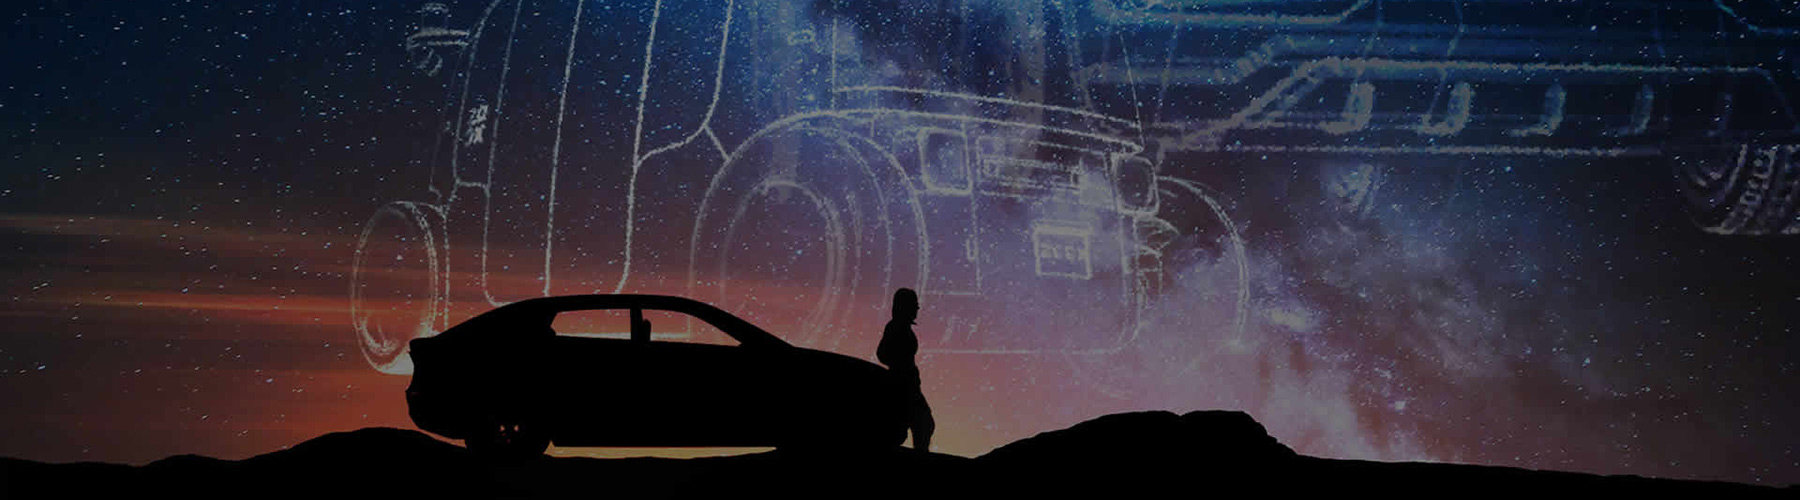 Silhouette of vehicle and person sitting on it, stars shaped like vehicles in the sky